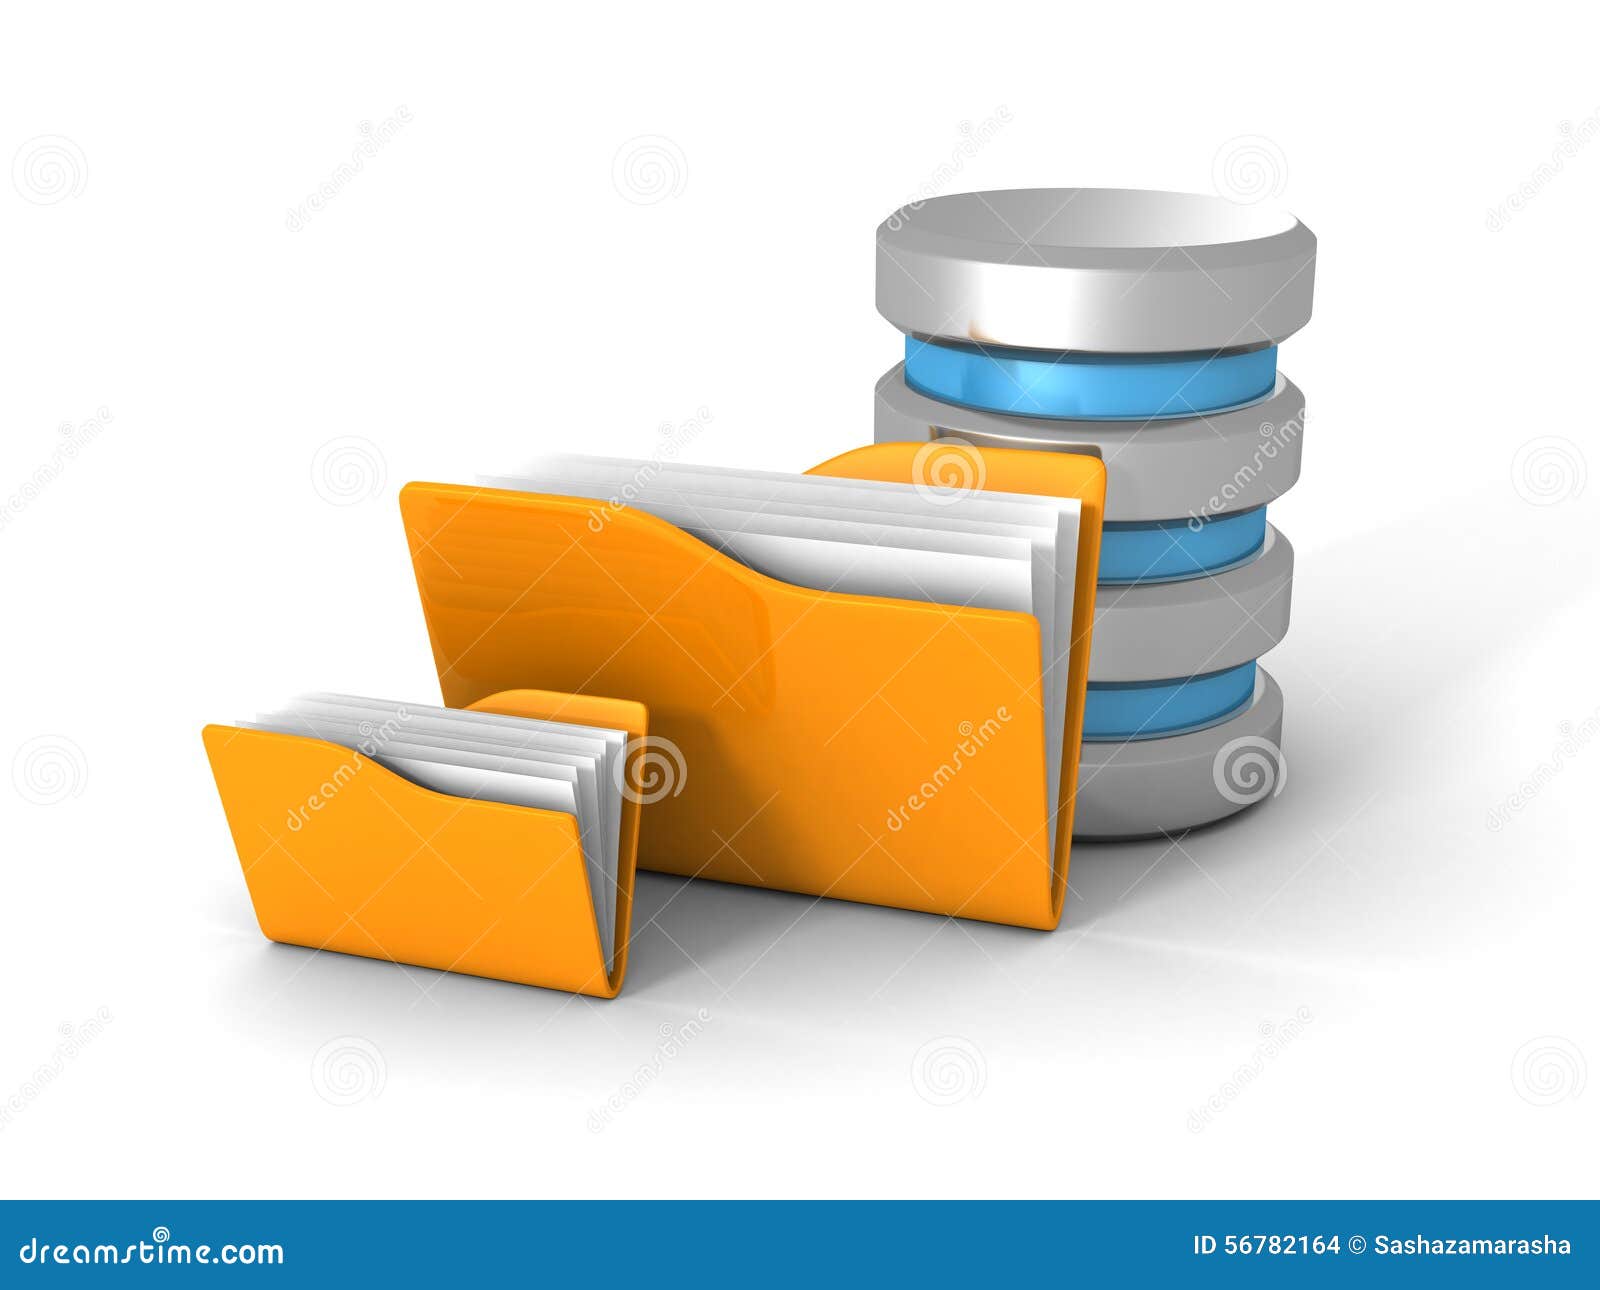 computer database clipart - photo #45